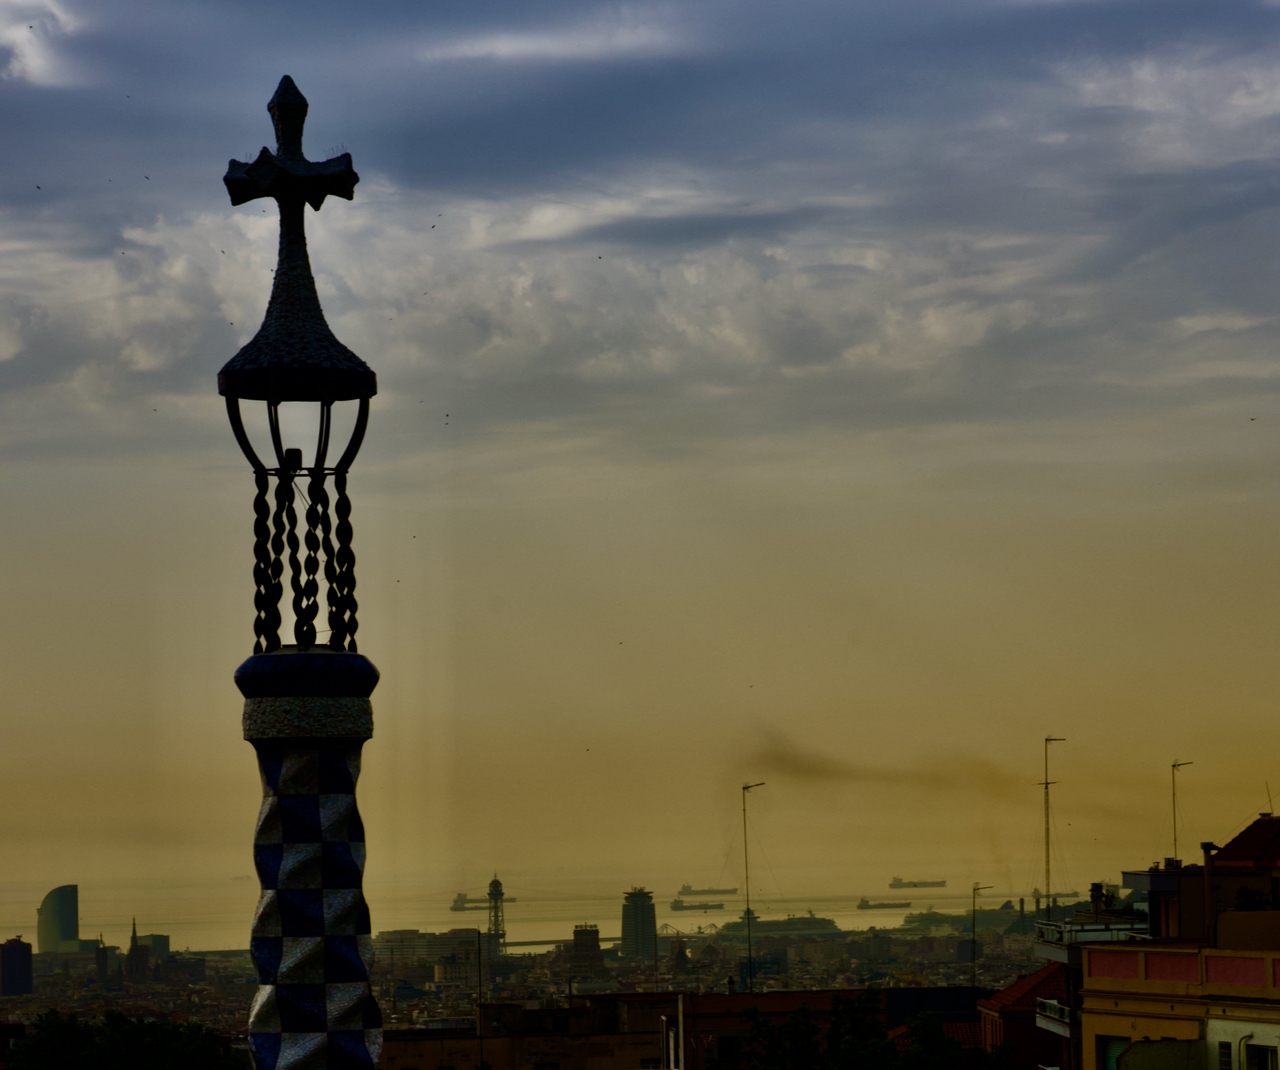 Shipping boats line up outside of Barcelona while a cross rises above the city.